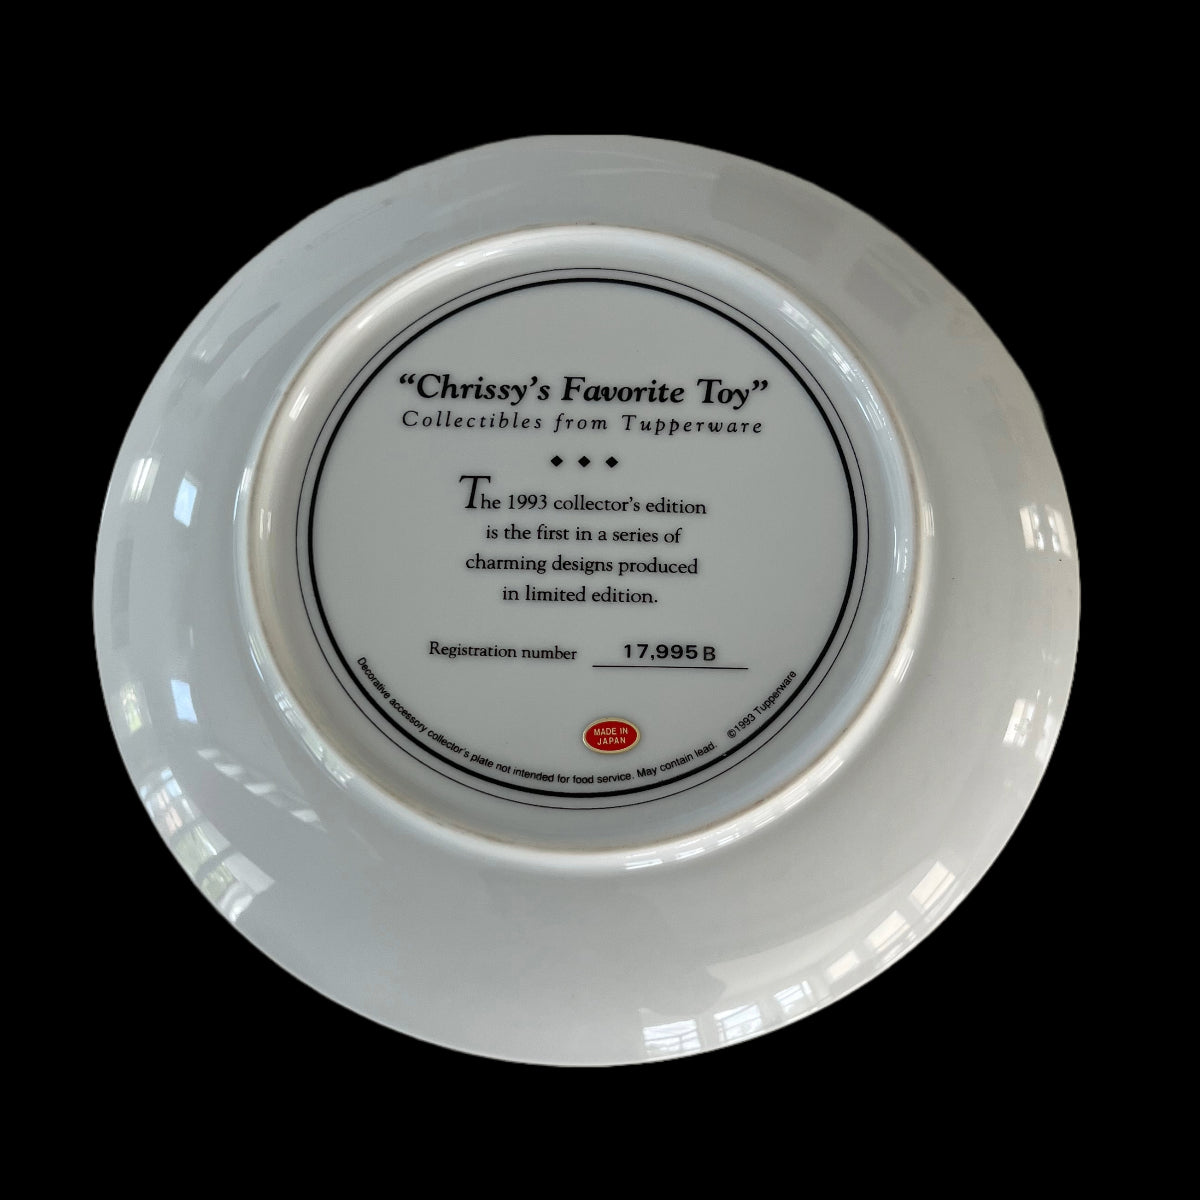 Vintage 1993 Collectibles from Tupperware Plate "Chrissy's Favorite Toy"